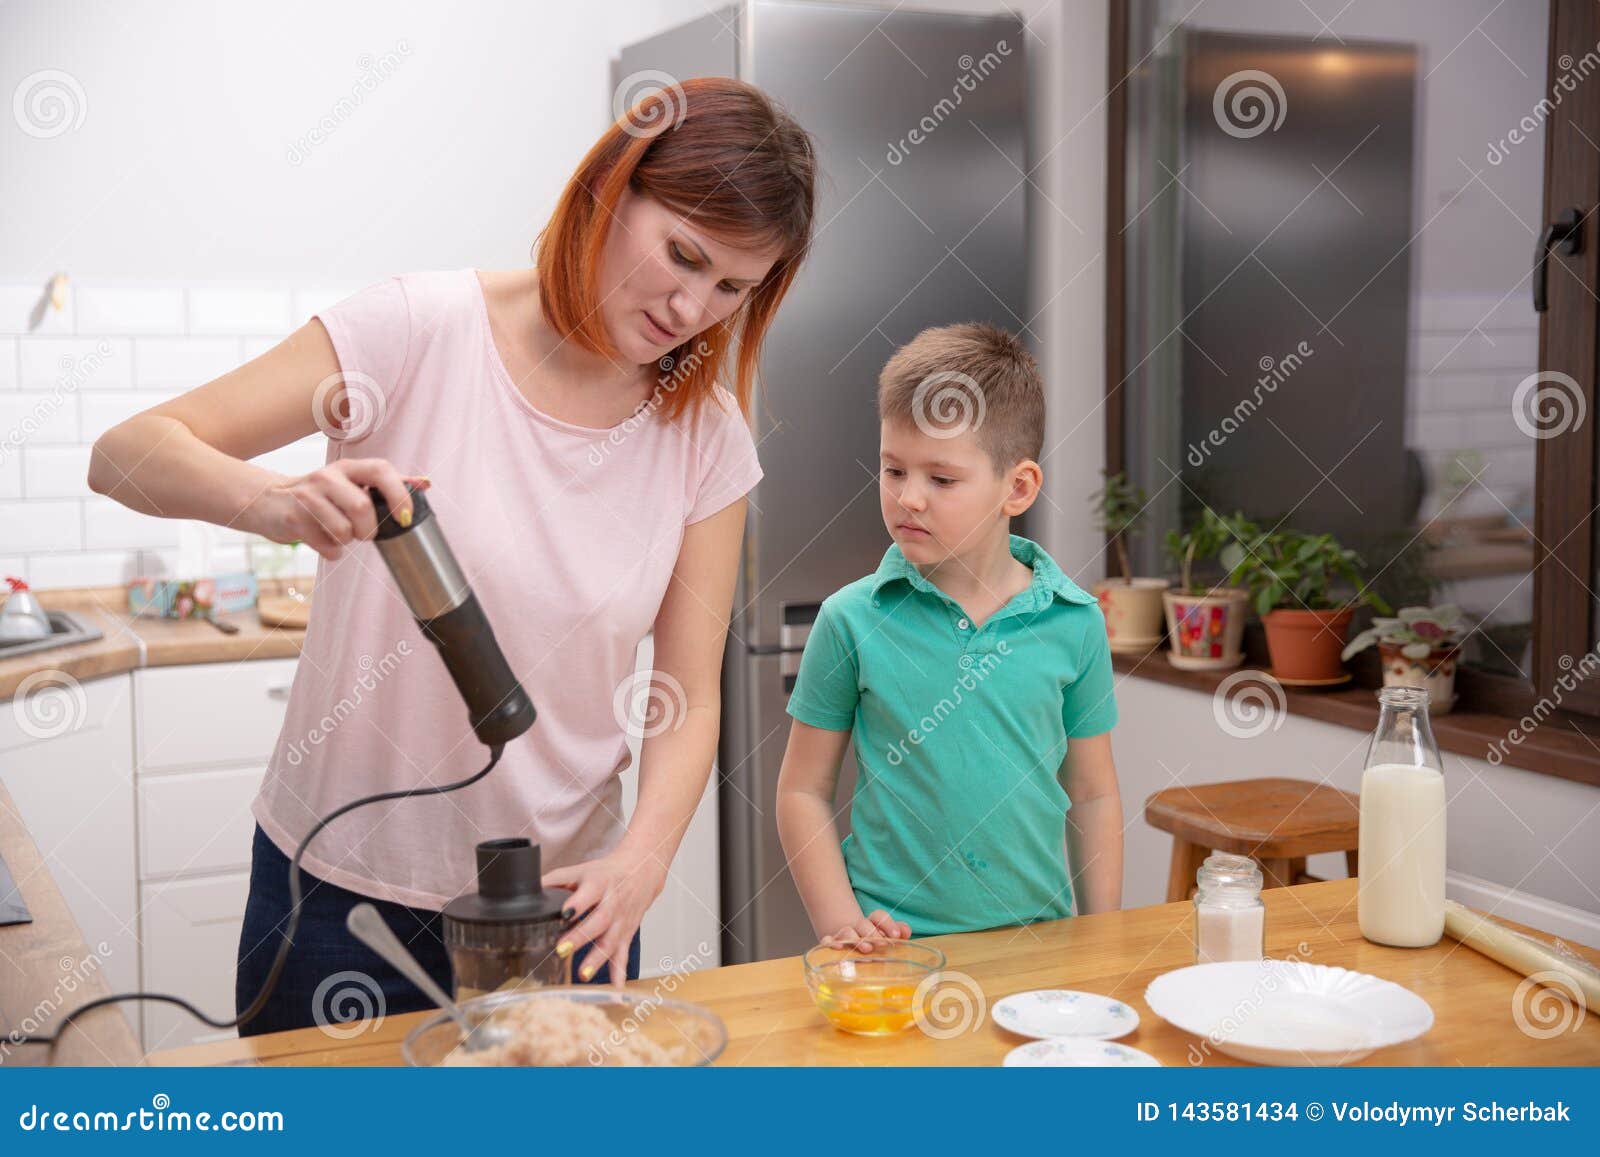 Little Boy Helping His Mother With The Cooking In The Kitchen Stock